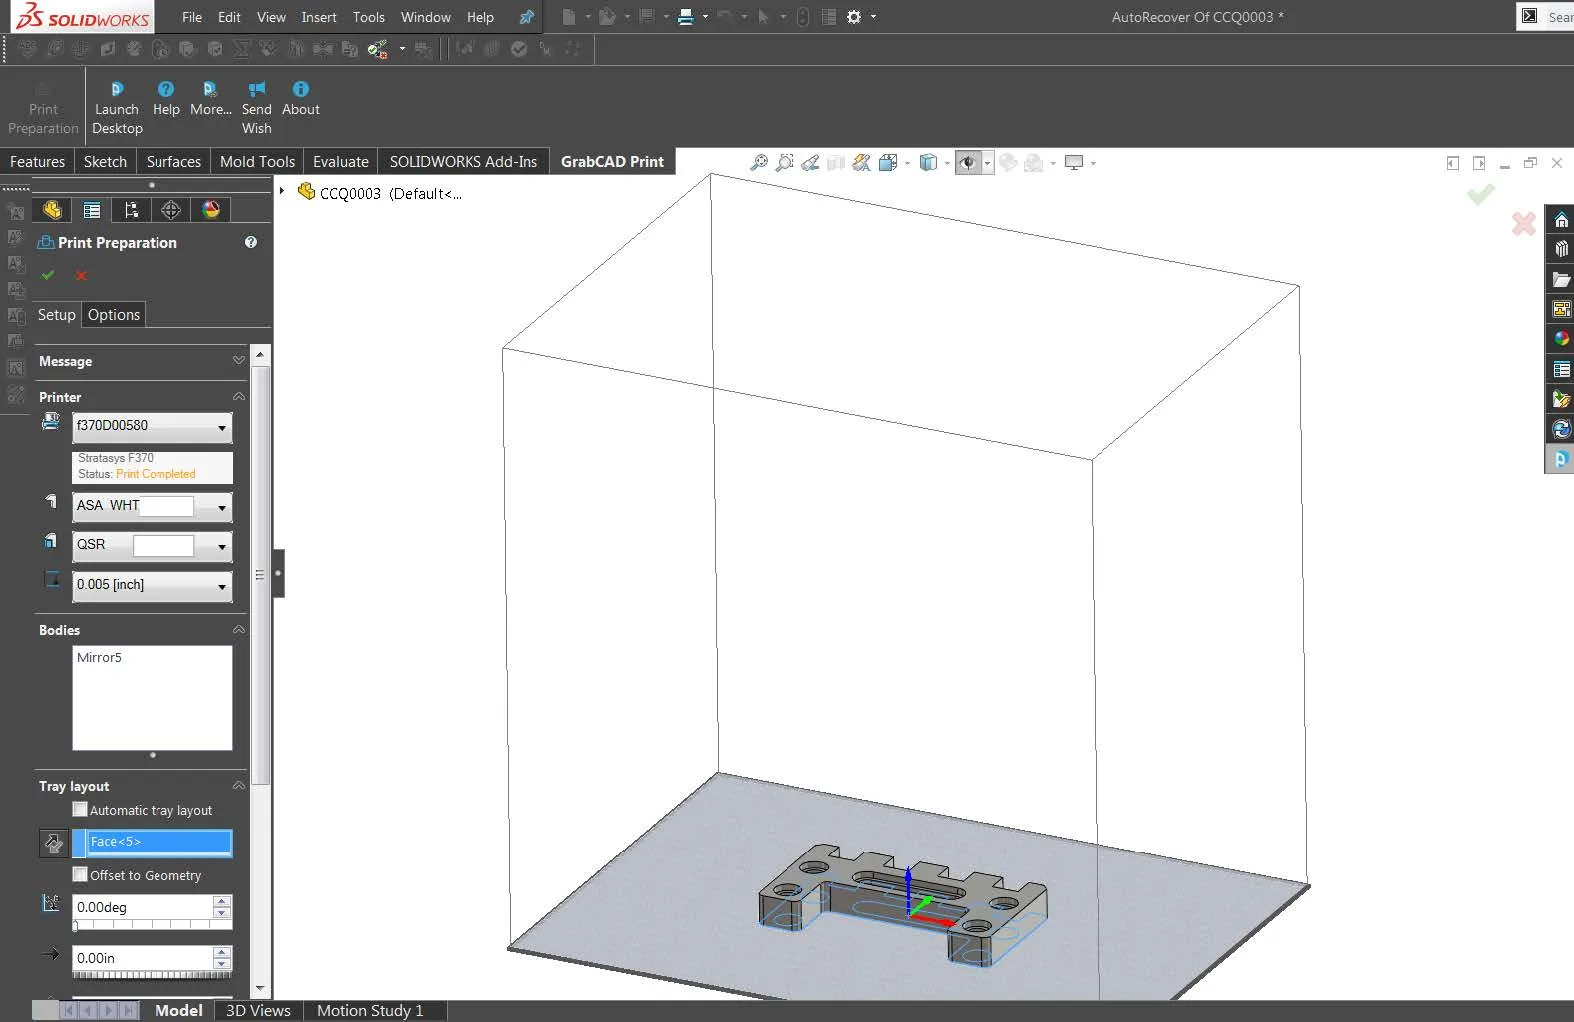 GrabCAD Print SOLIDWORKS Add-in Printer Selection